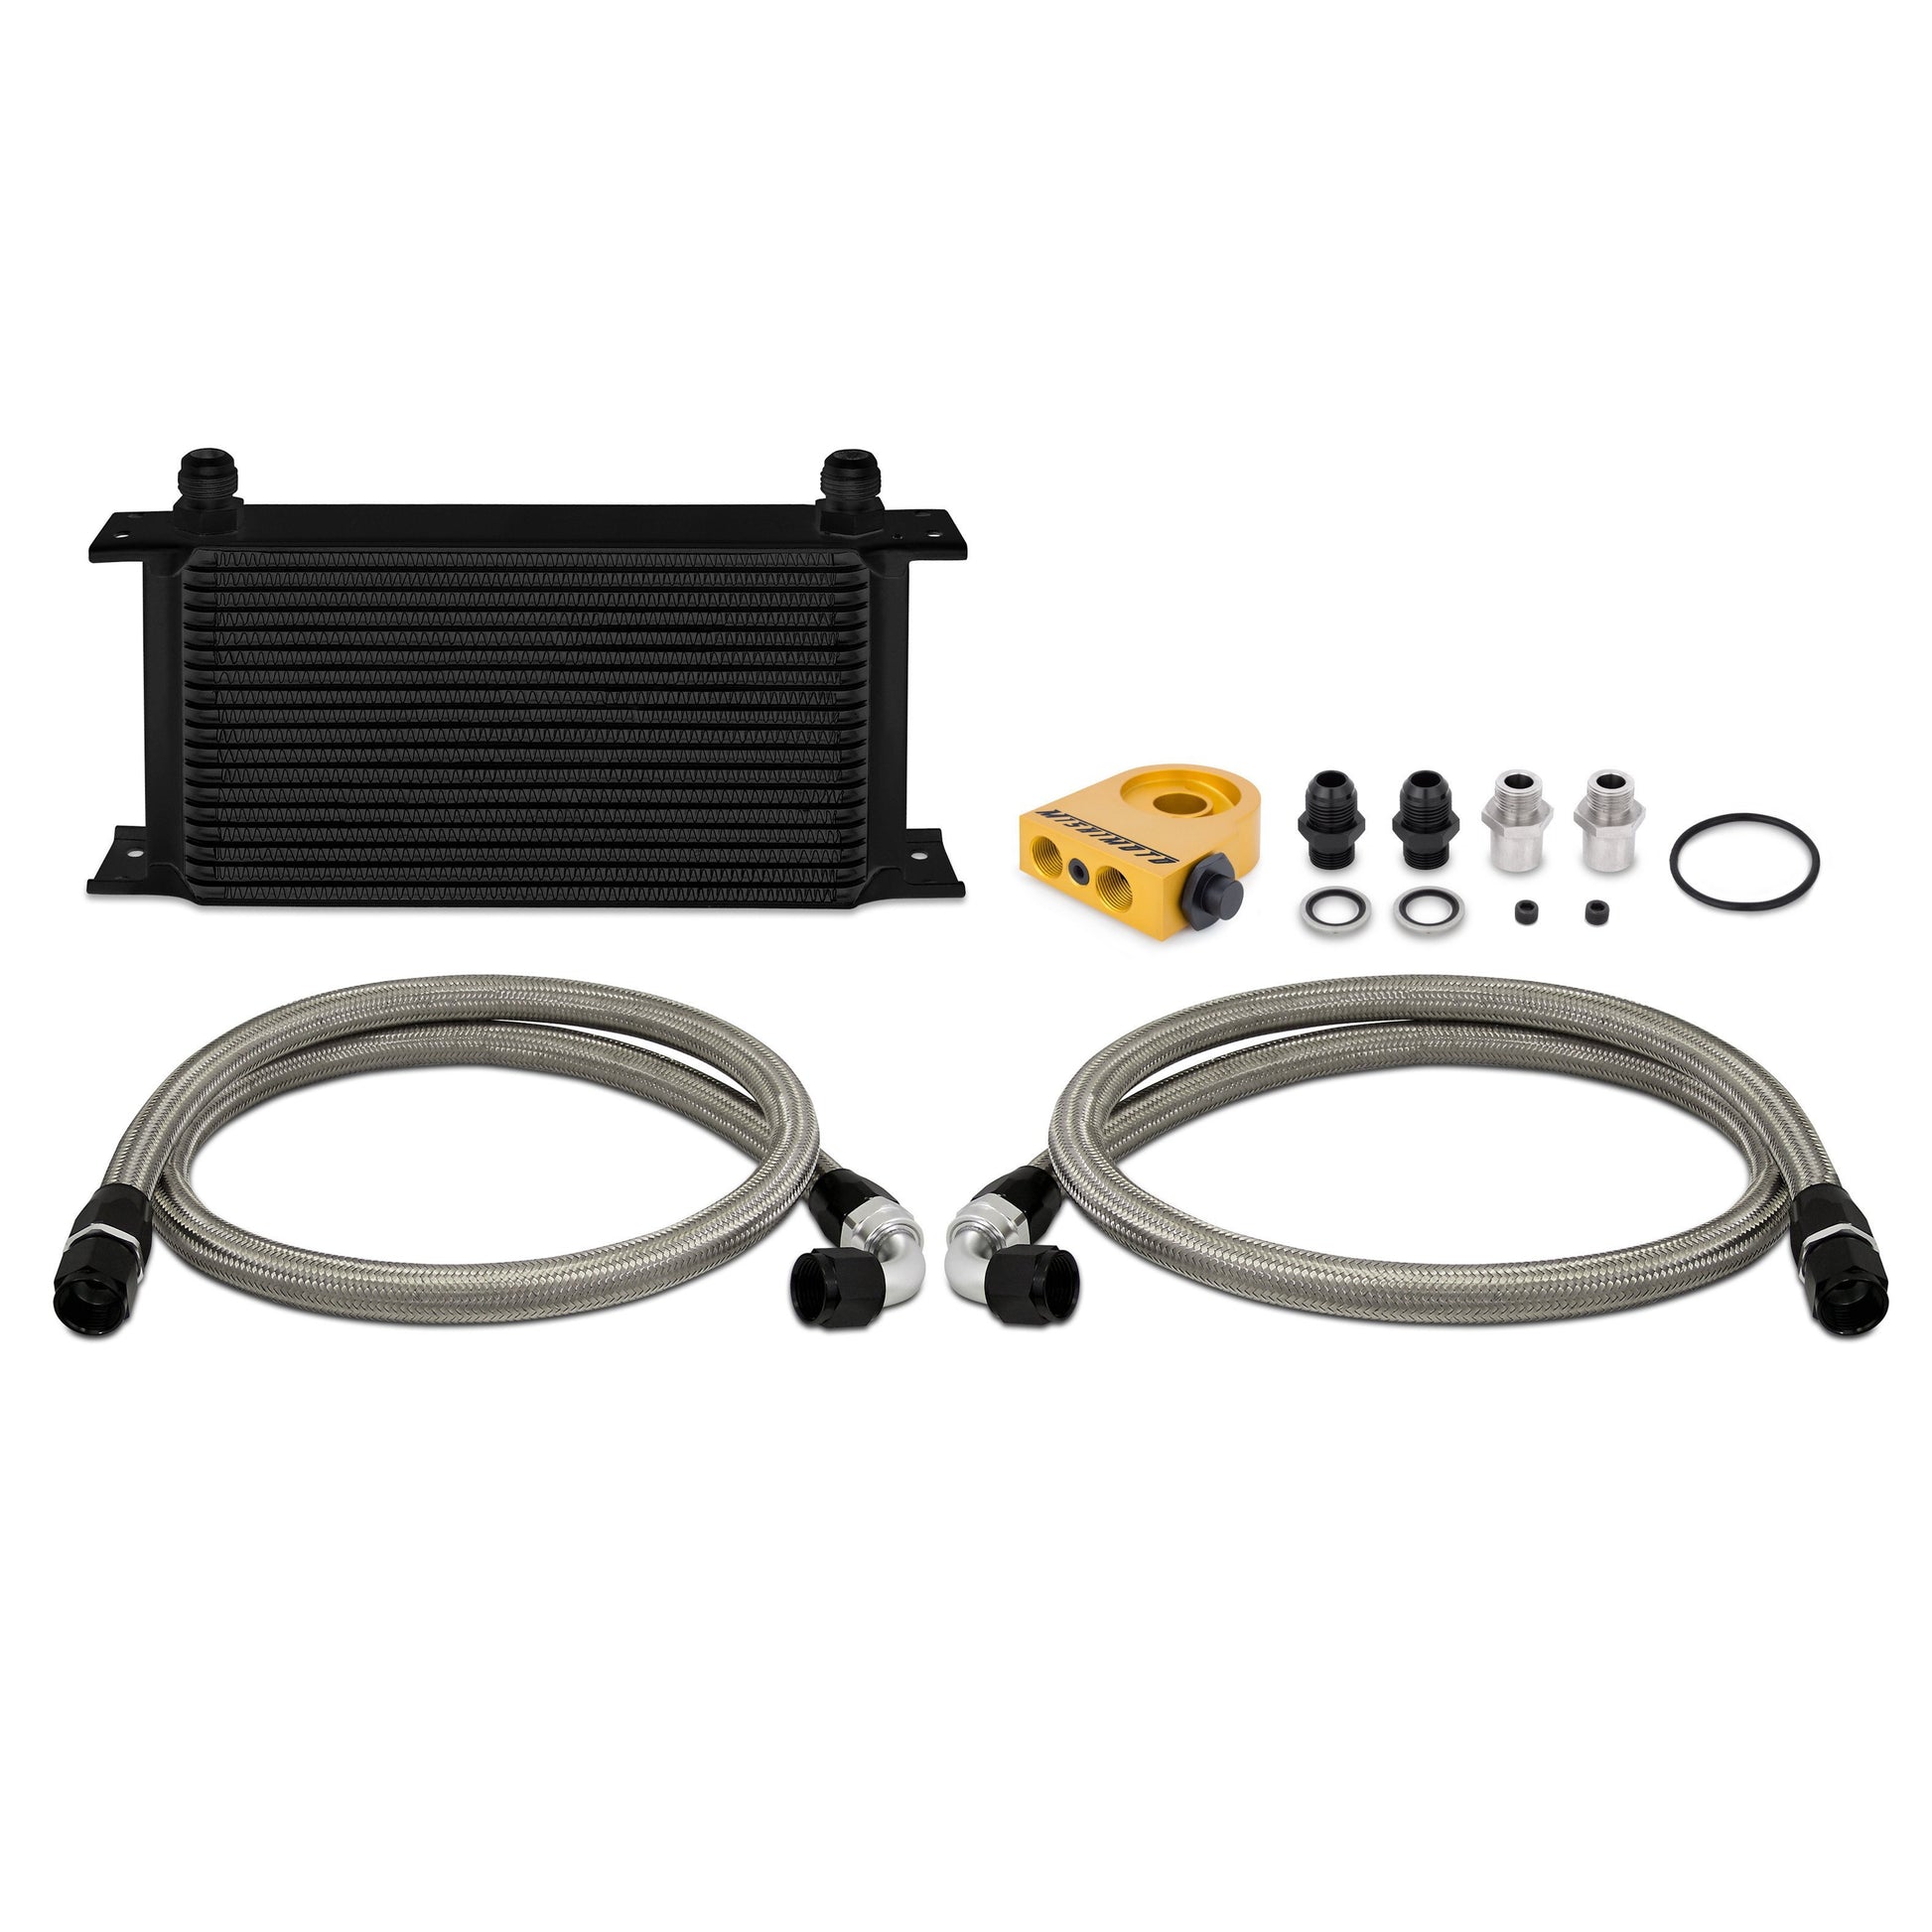 Mishimoto Thermostatic 19 Row Oil Cooler Kit - Universal-Fluid Coolers-Mishimoto-JDMuscle